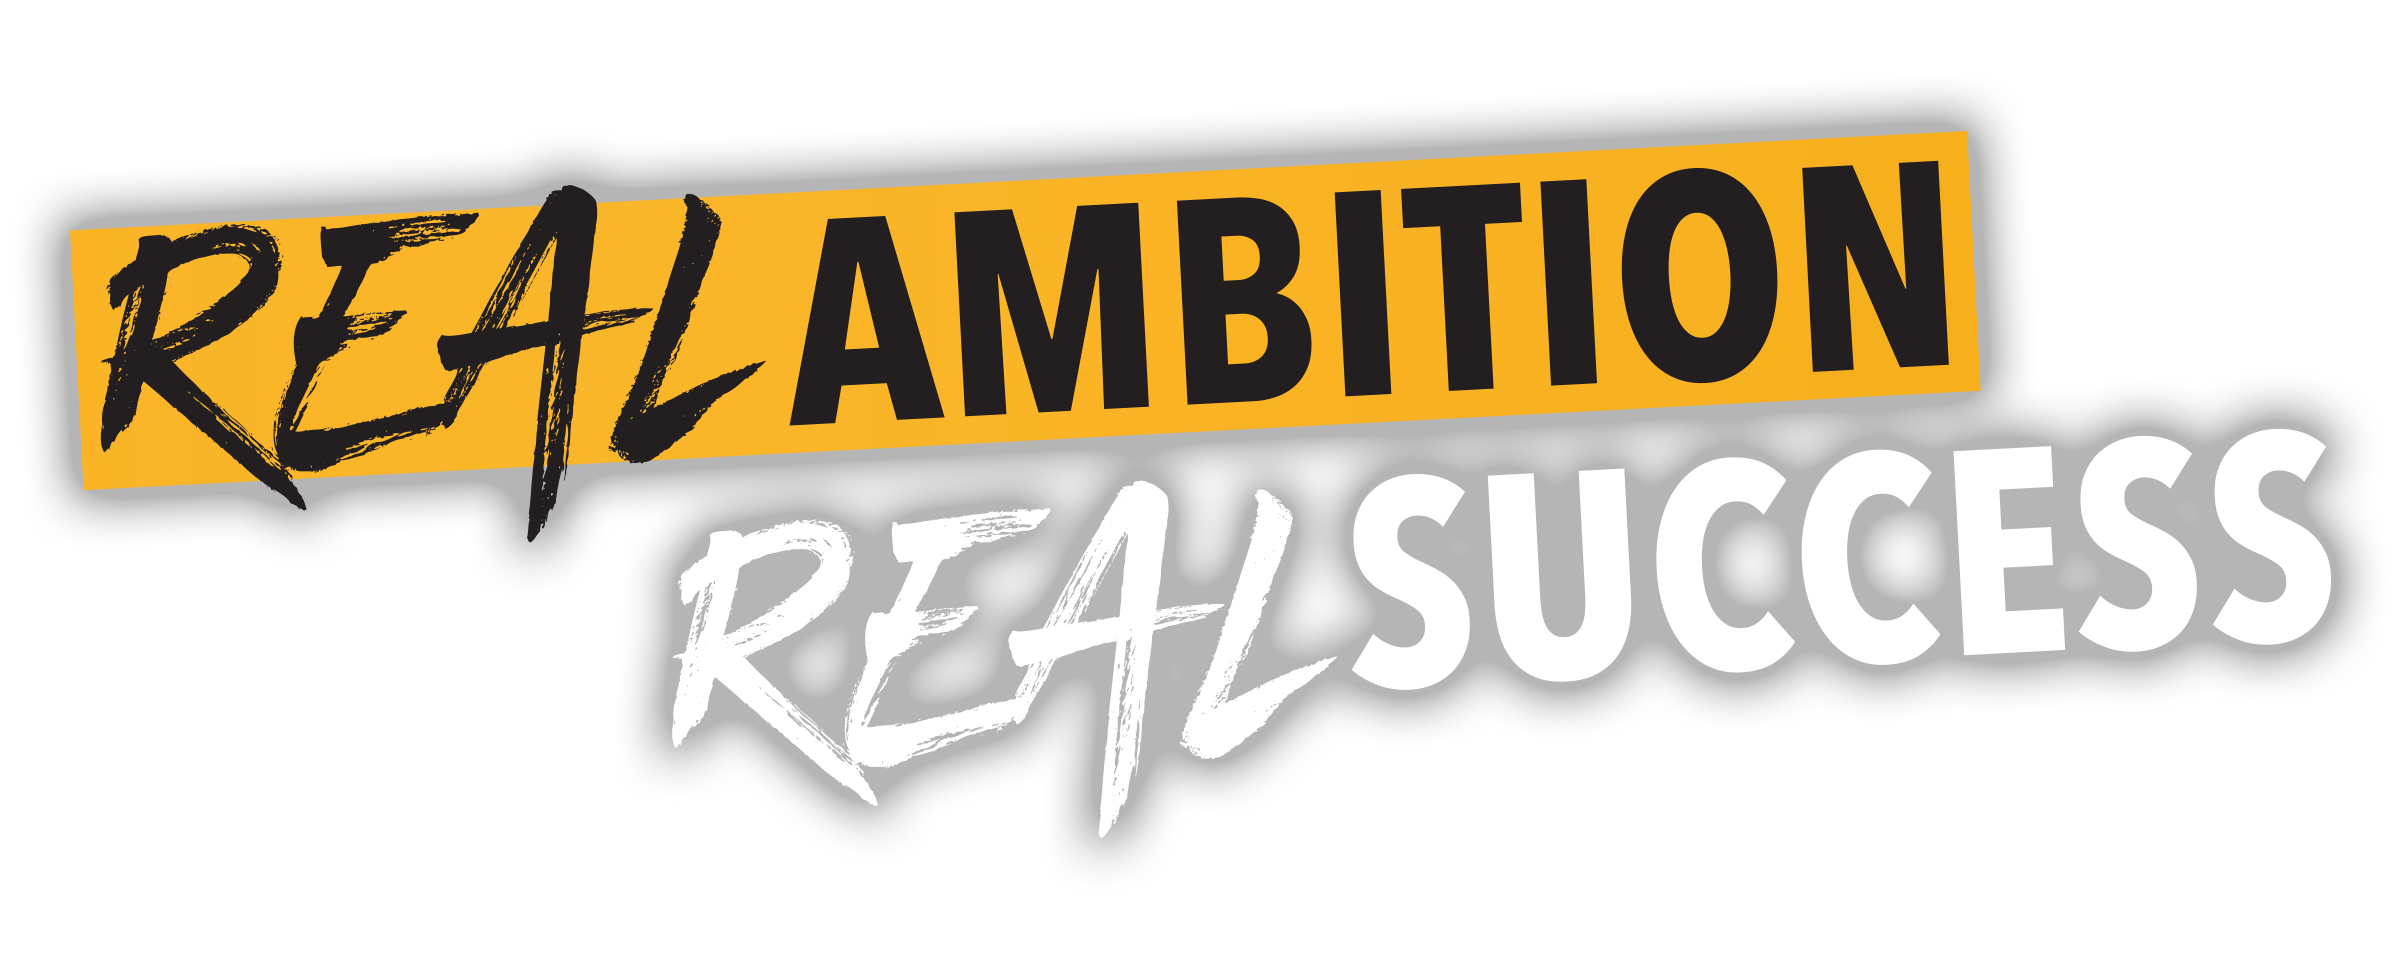 Real Ambition. Real Success.